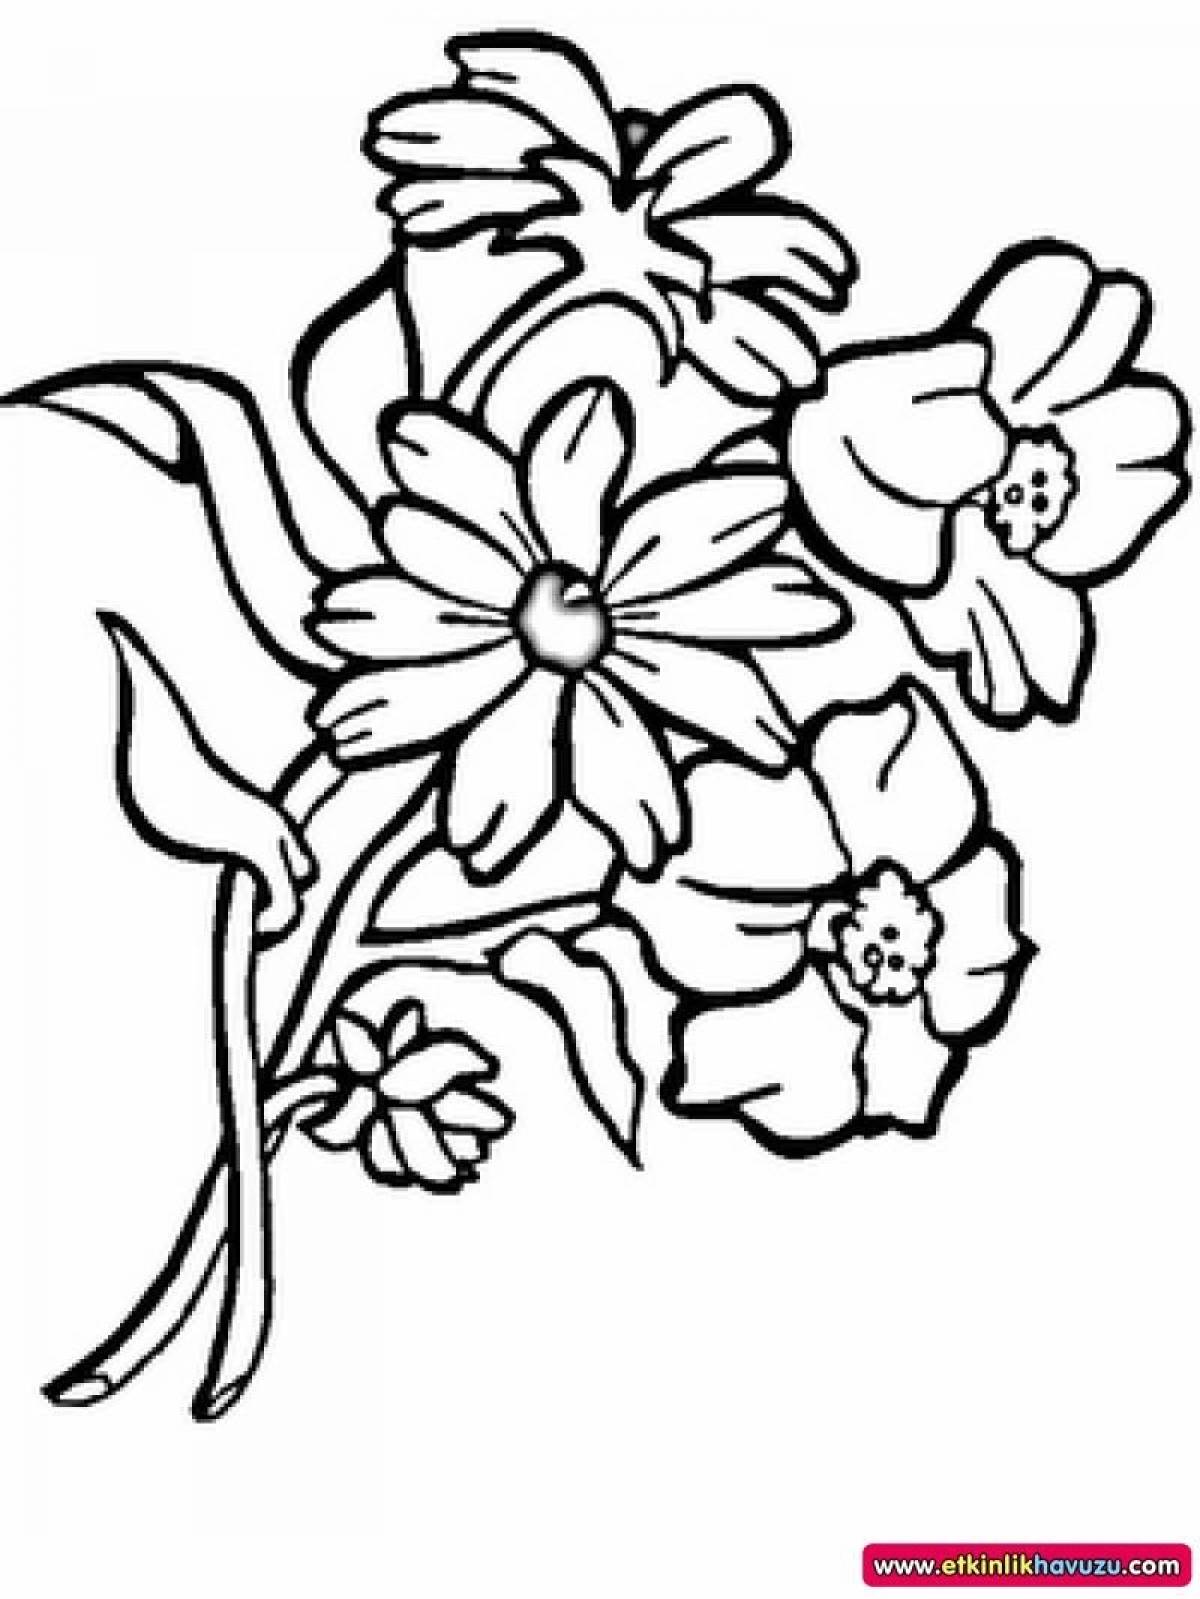 Adorable flower coloring pages